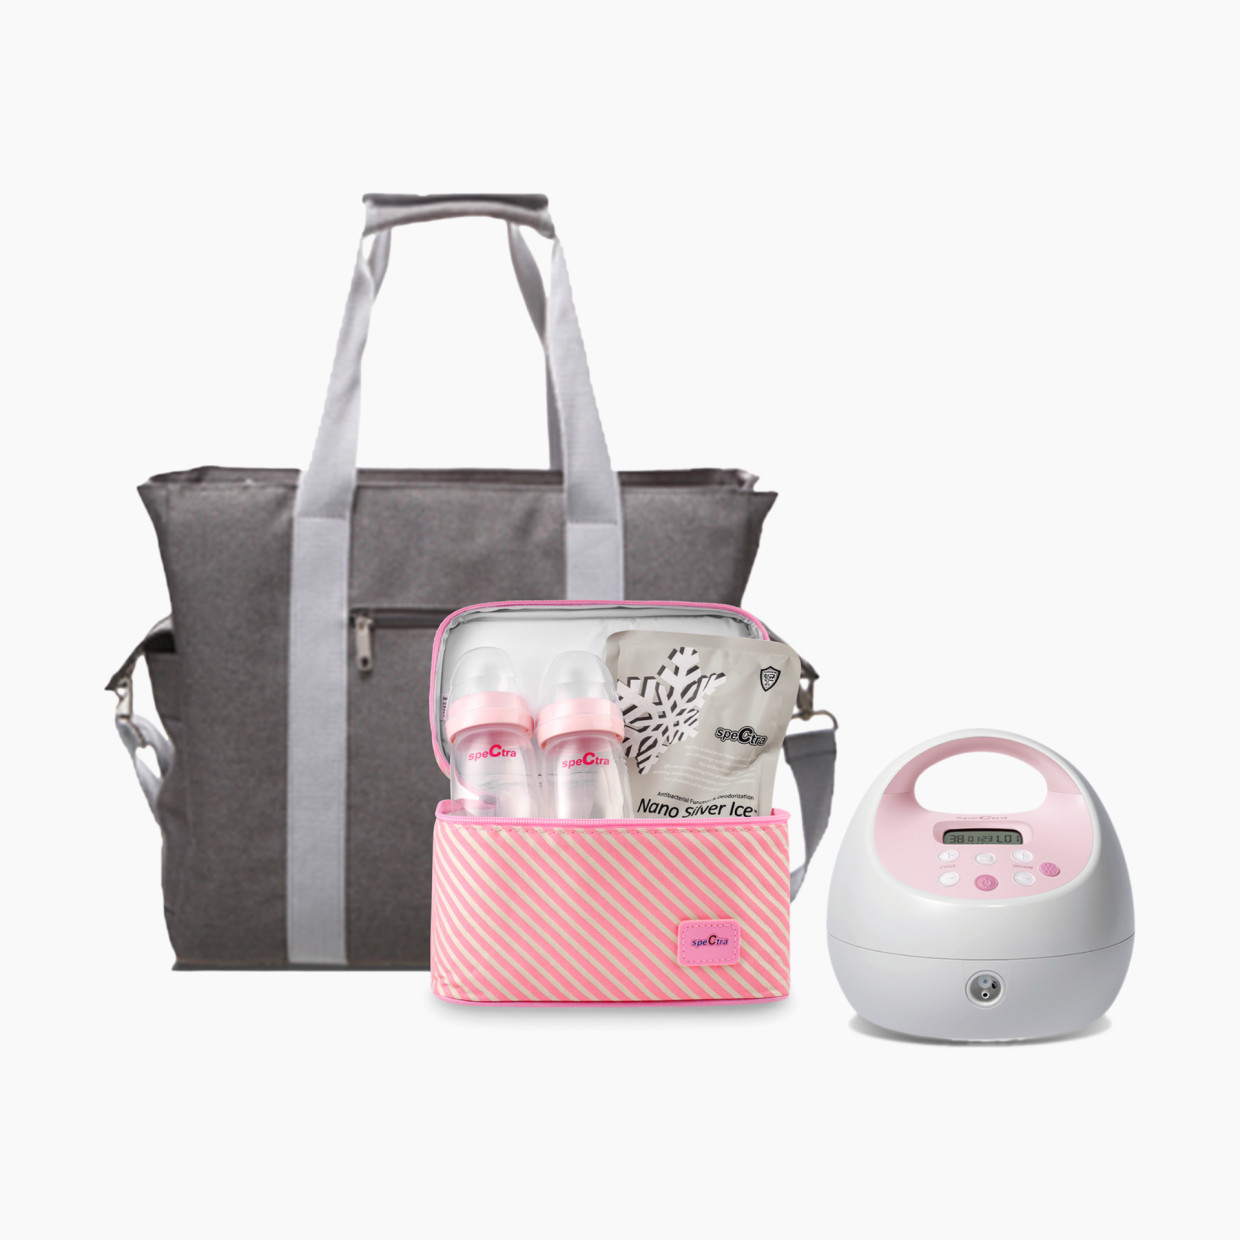 Spectra S2 Plus Electric Breast Pump with Tote Bag and Accessories